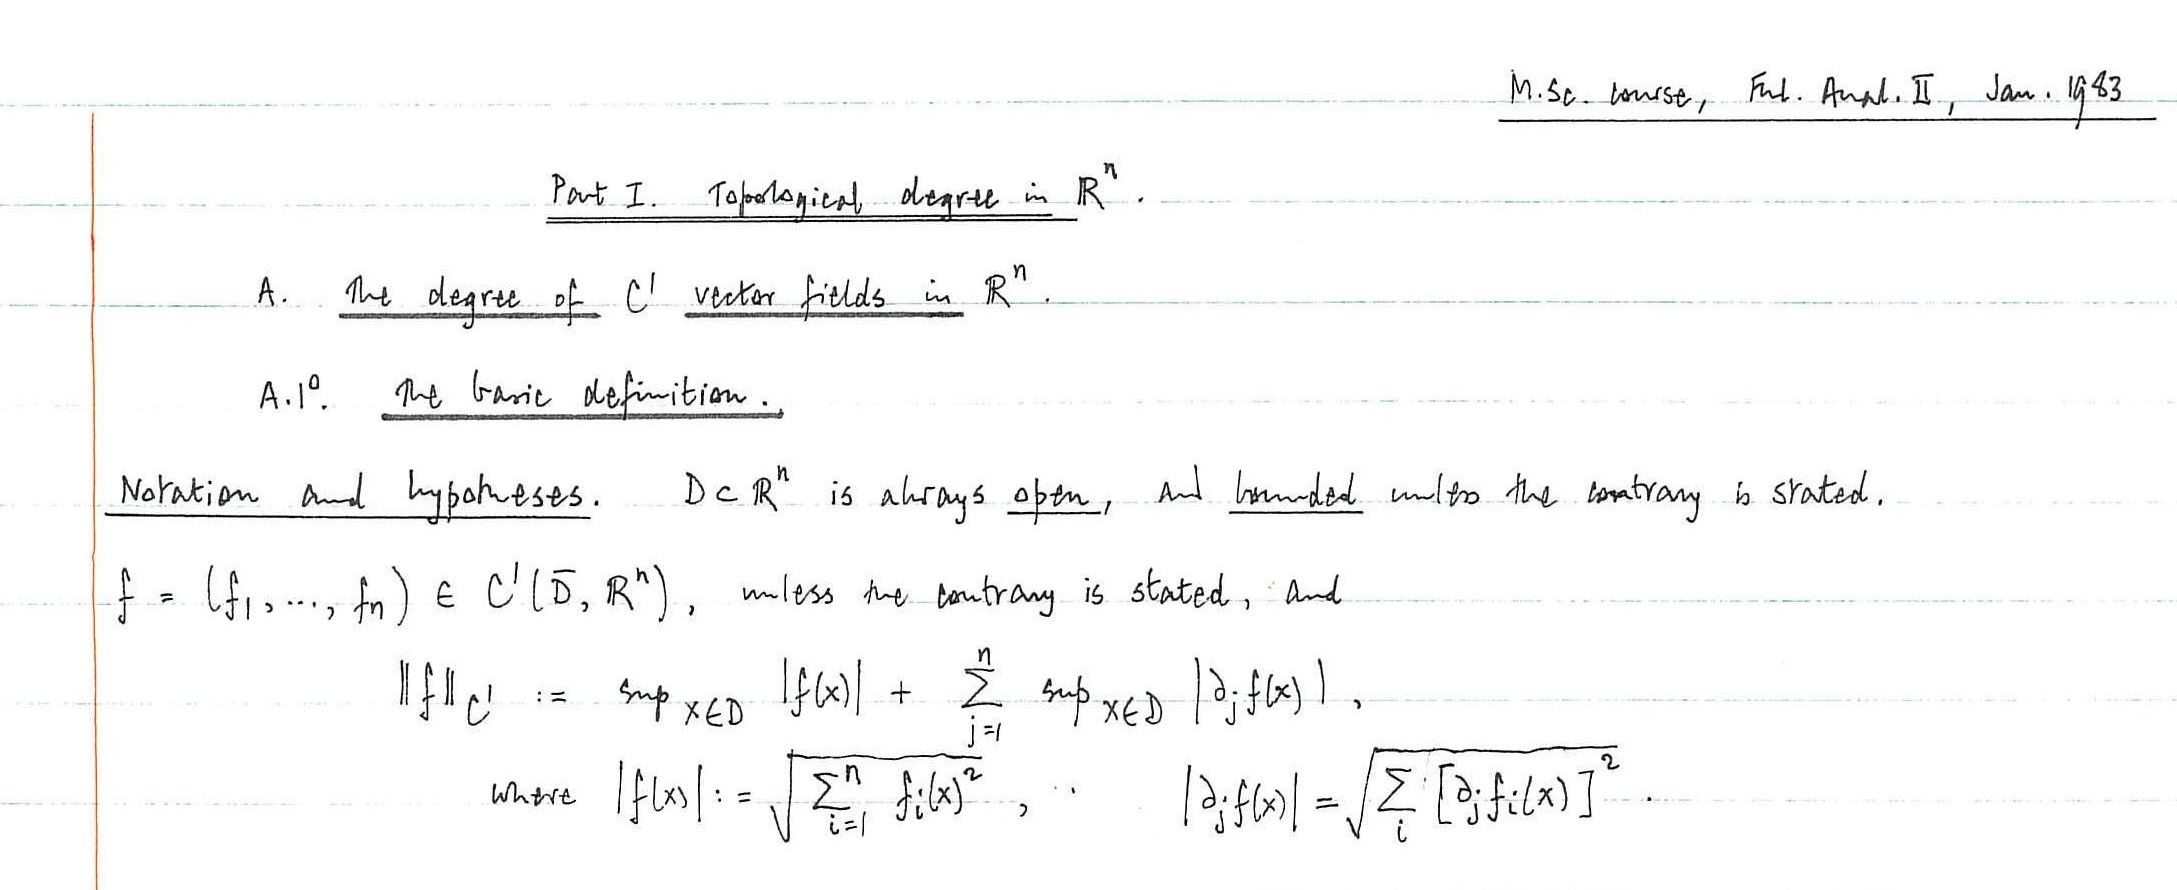 Extract from notes for an MSc course entitled ‘Functional Analysis II’, University of Sussex, 1983